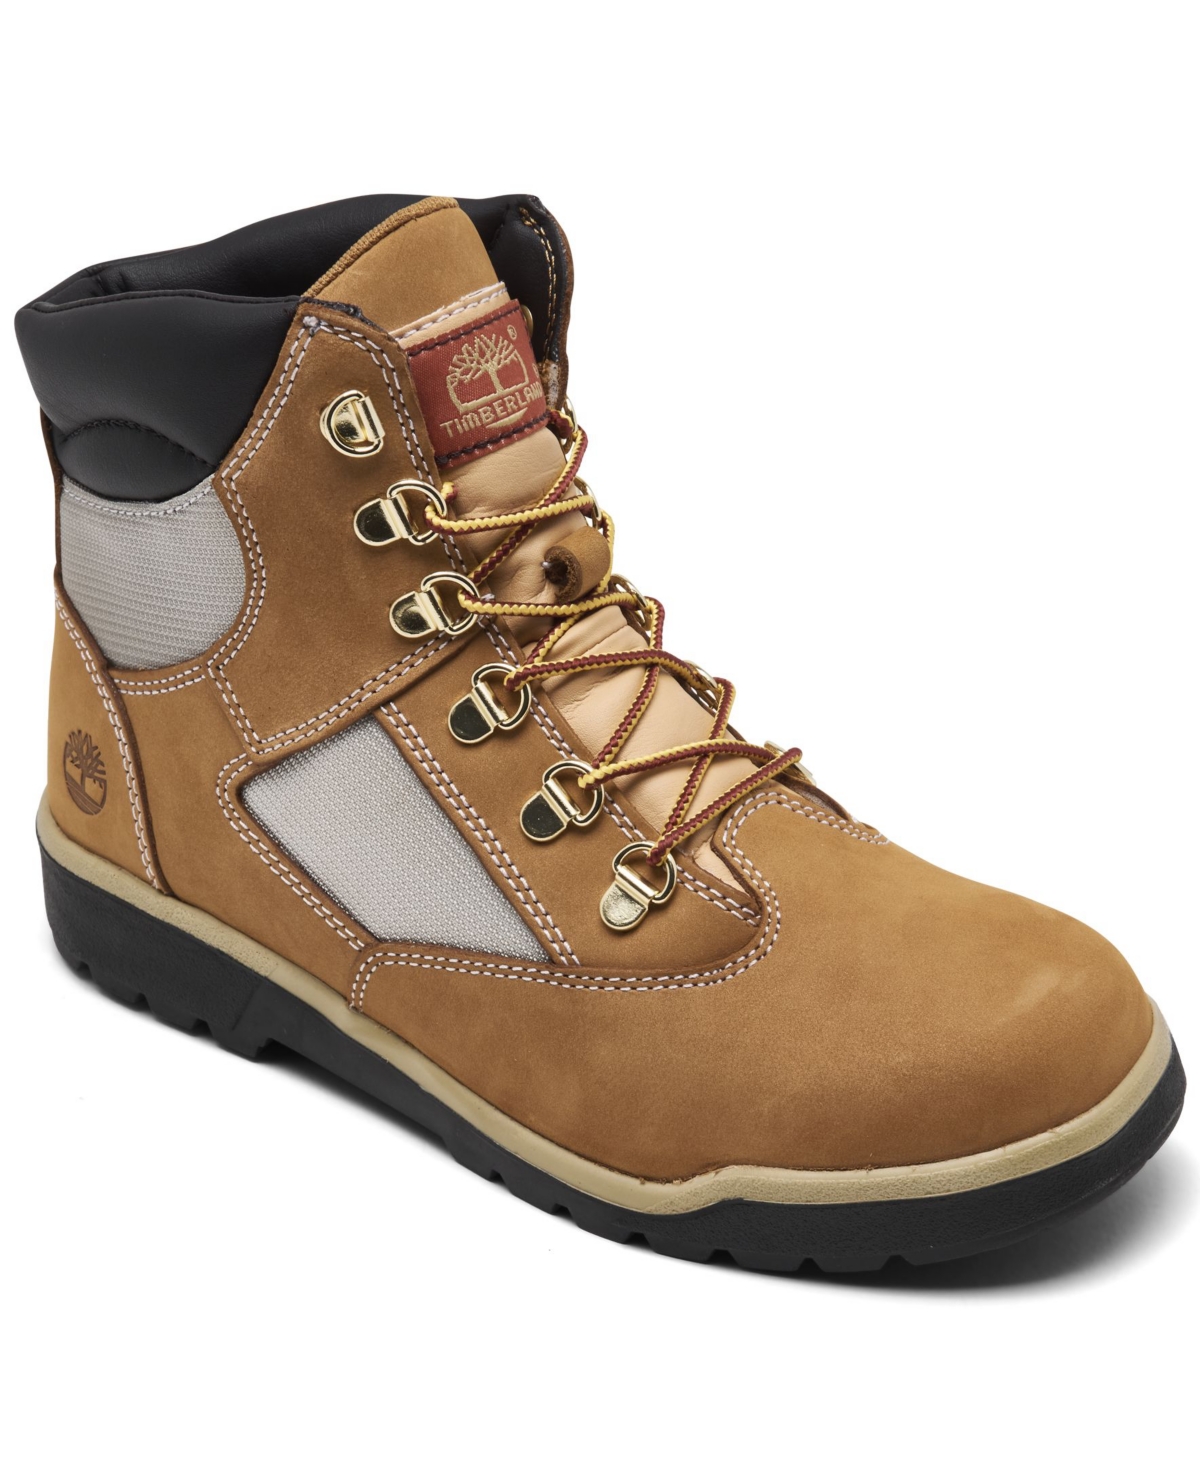 TIMBERLAND BIG KIDS 6" FIELD BOOTS FROM FINISH LINE